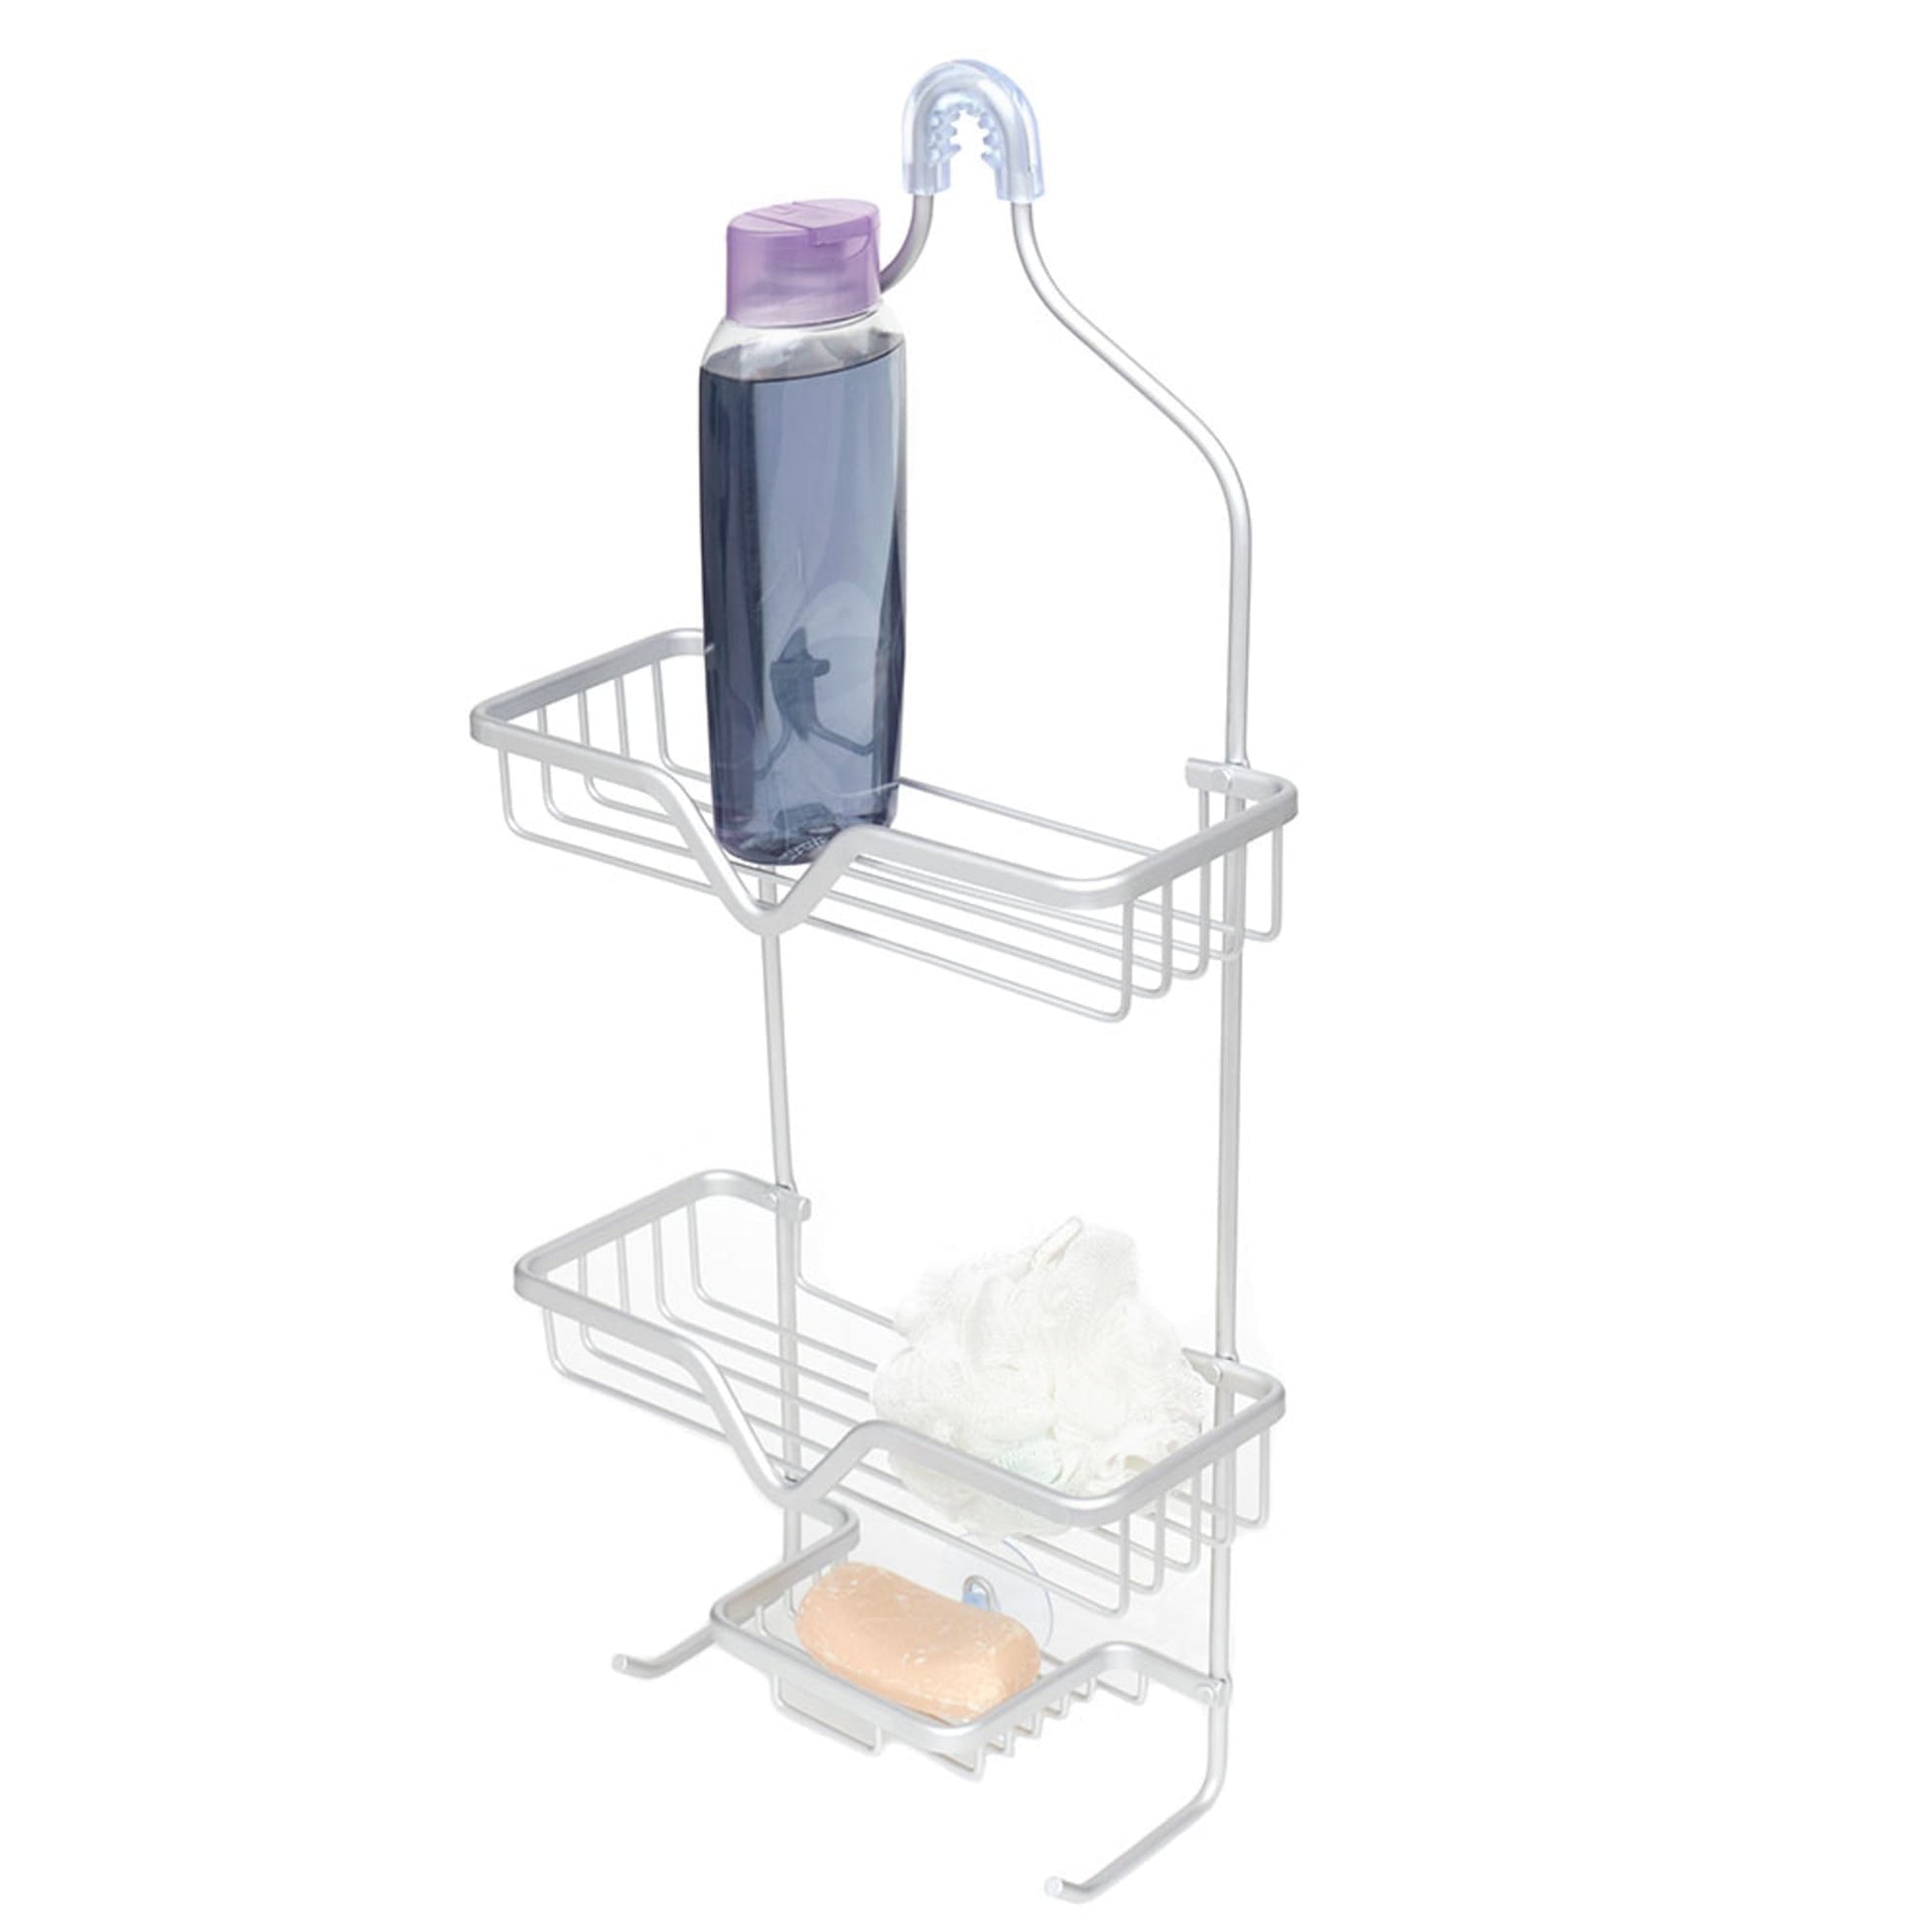 Home Basics Clear Plastic 1-Shelf Hanging Shower Caddy 10.22-in x